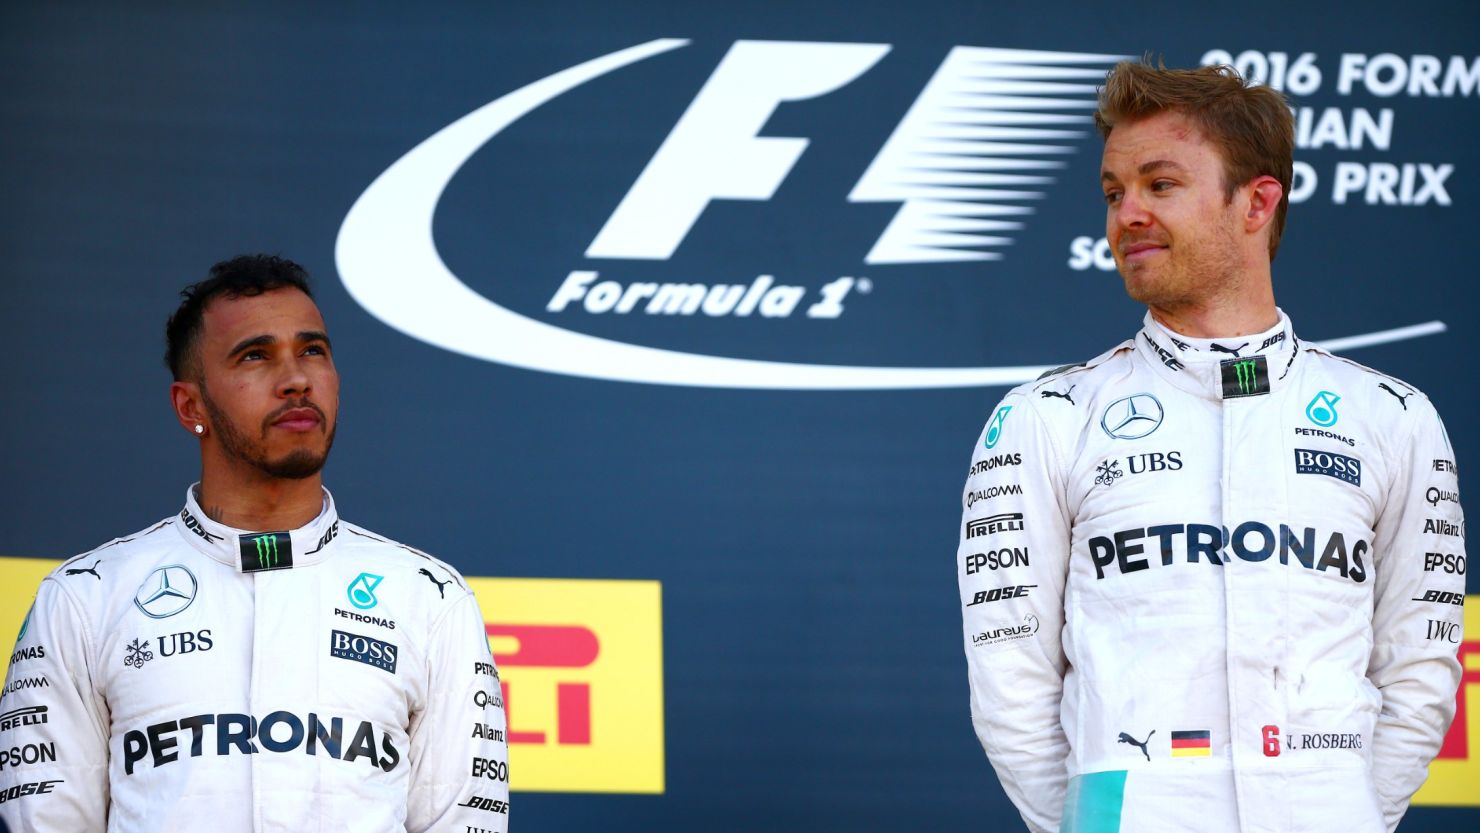 Mercedes insists it is not favoring Nico Rosberg (right), who has won all four F1 races in 2016, over teammate Lewis Hamilton (left)